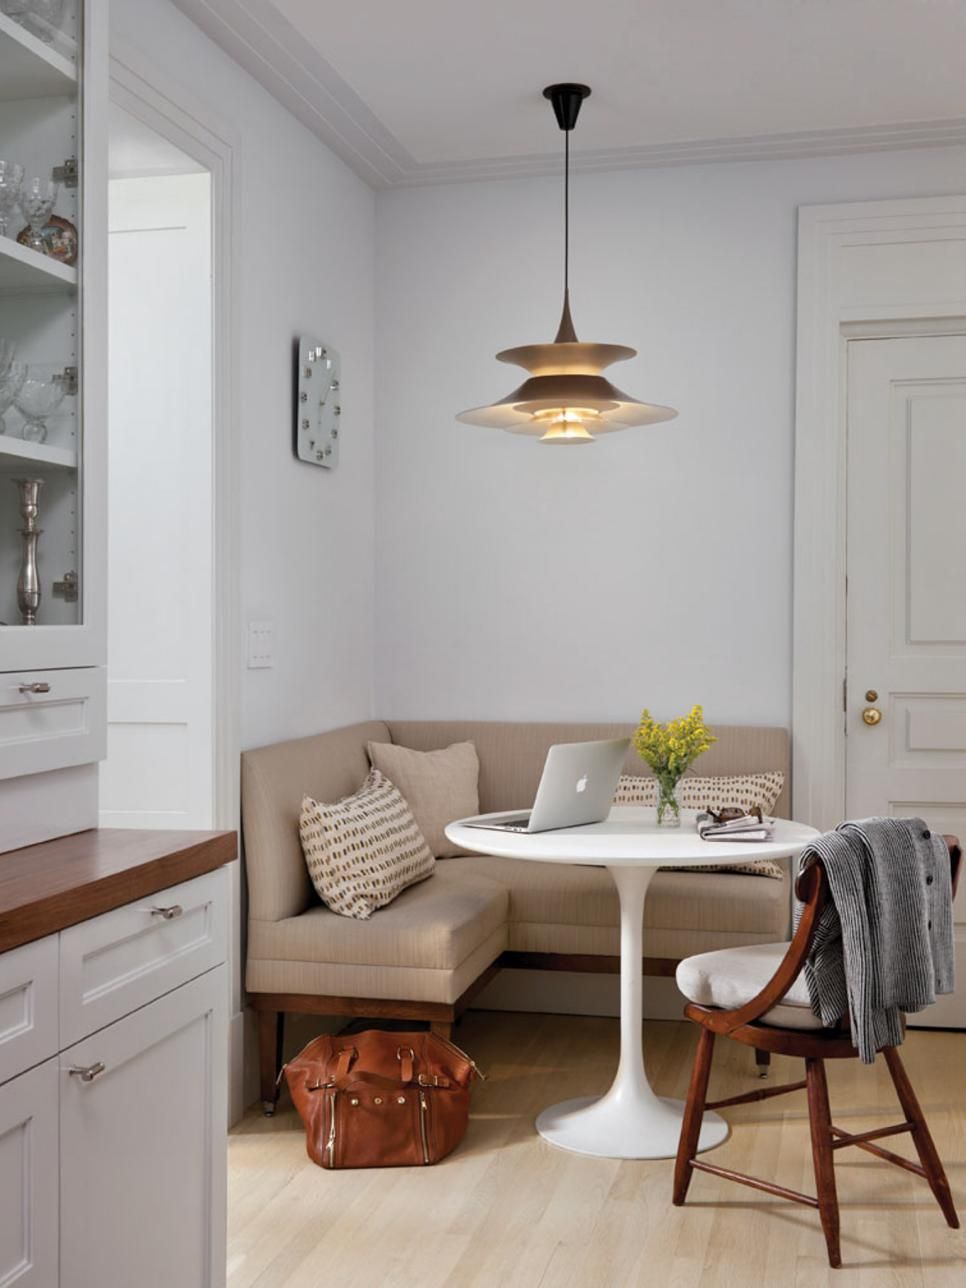 Transform Your Morning Routine with Corner Breakfast Nook Furniture